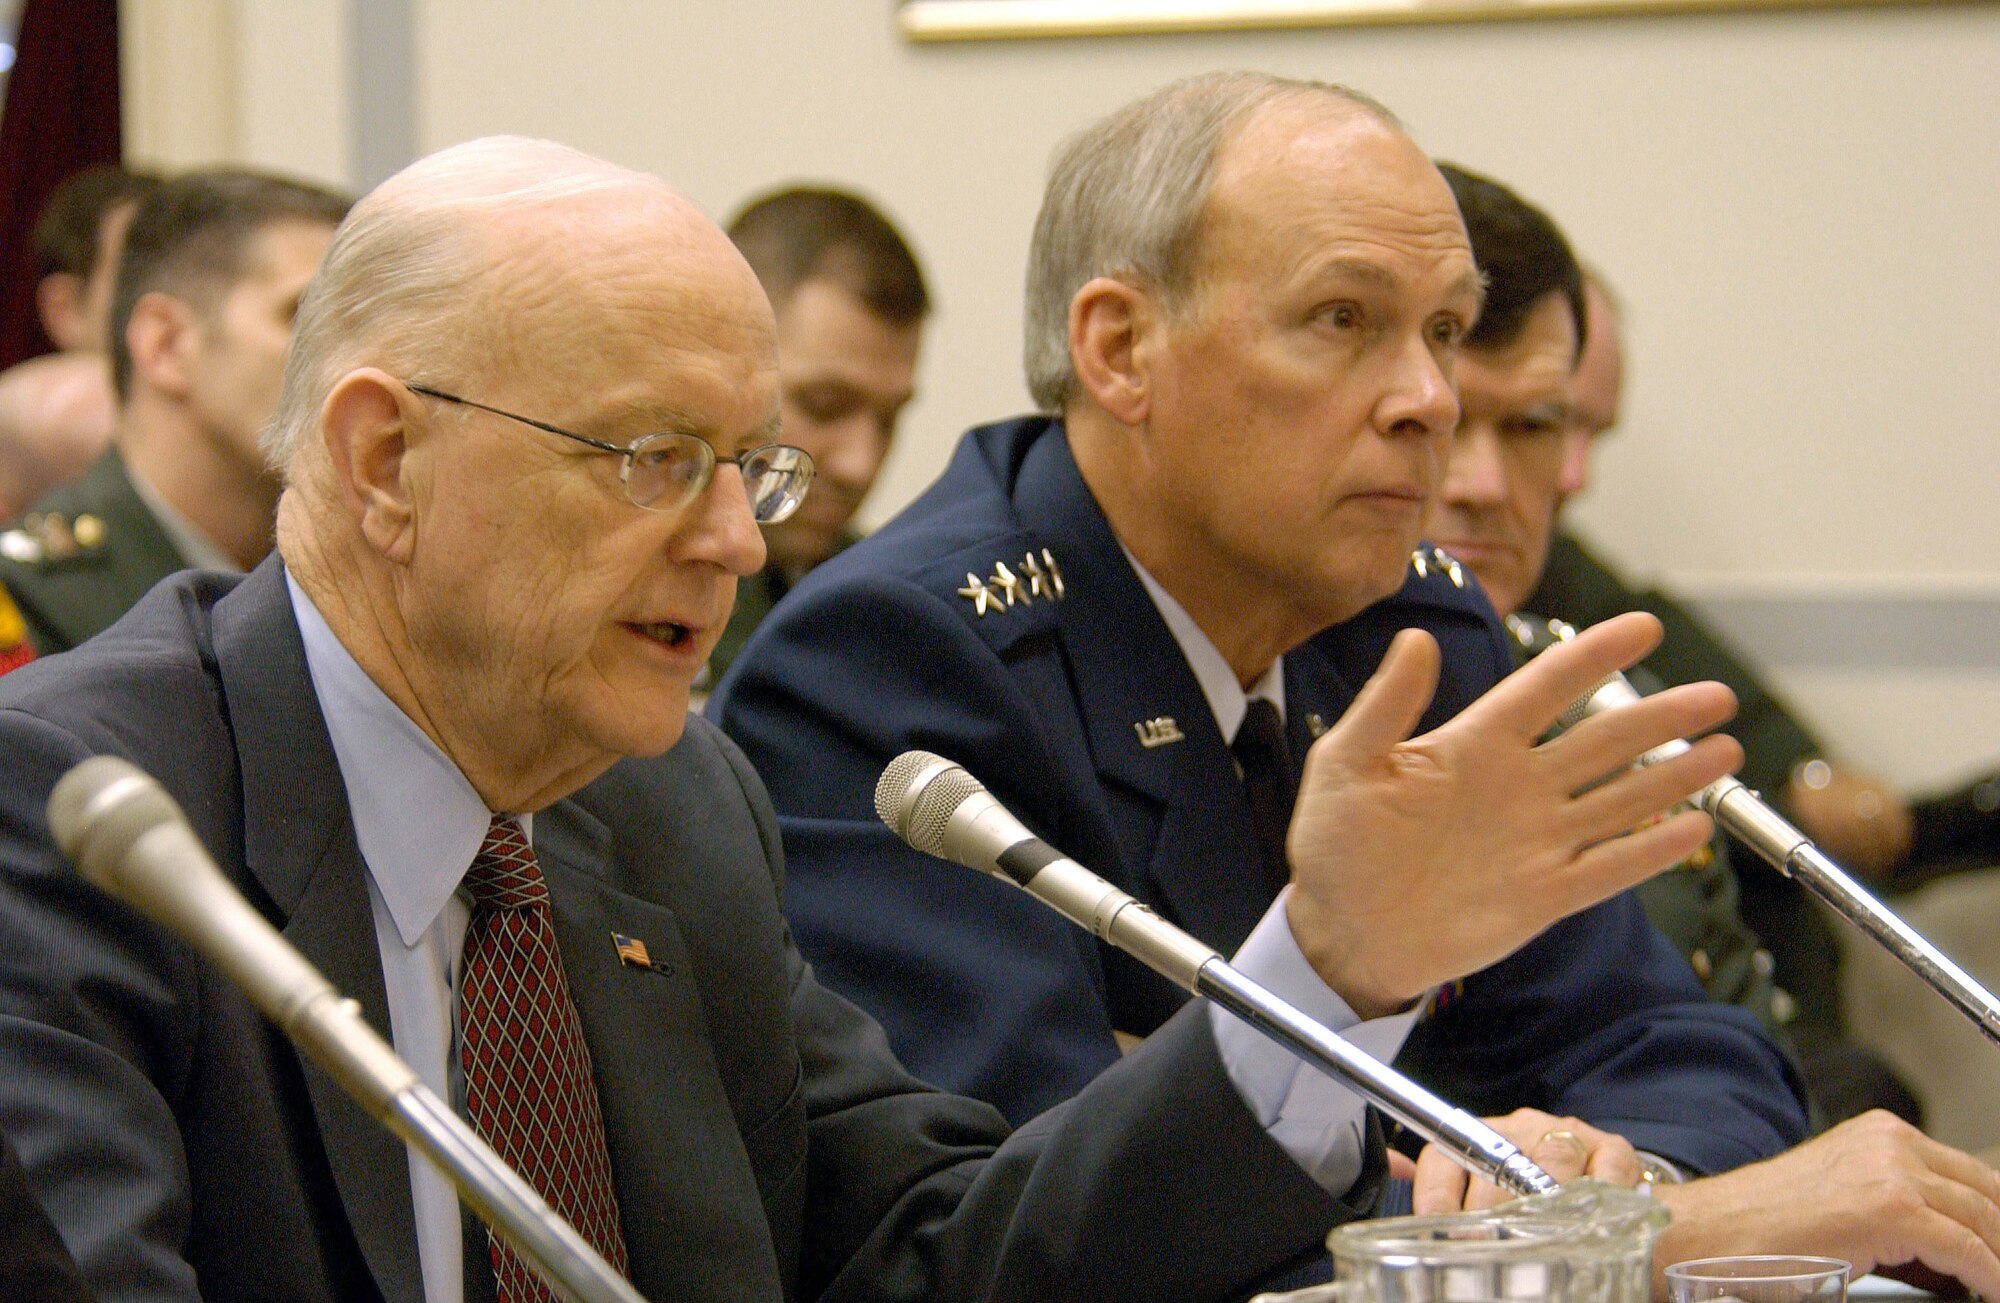 WASHINGTON -- Peter B. Teets, acting secretary of the Air Force, and General Lance W. Lord, commander of Air Force Space Command, testify before members of the House Armed Services Committee subcommittee on strategic forces about the fiscal 2006 budget for space operations.  (U.S. Air Force photo by Master Sgt. Gary R. Coppage)